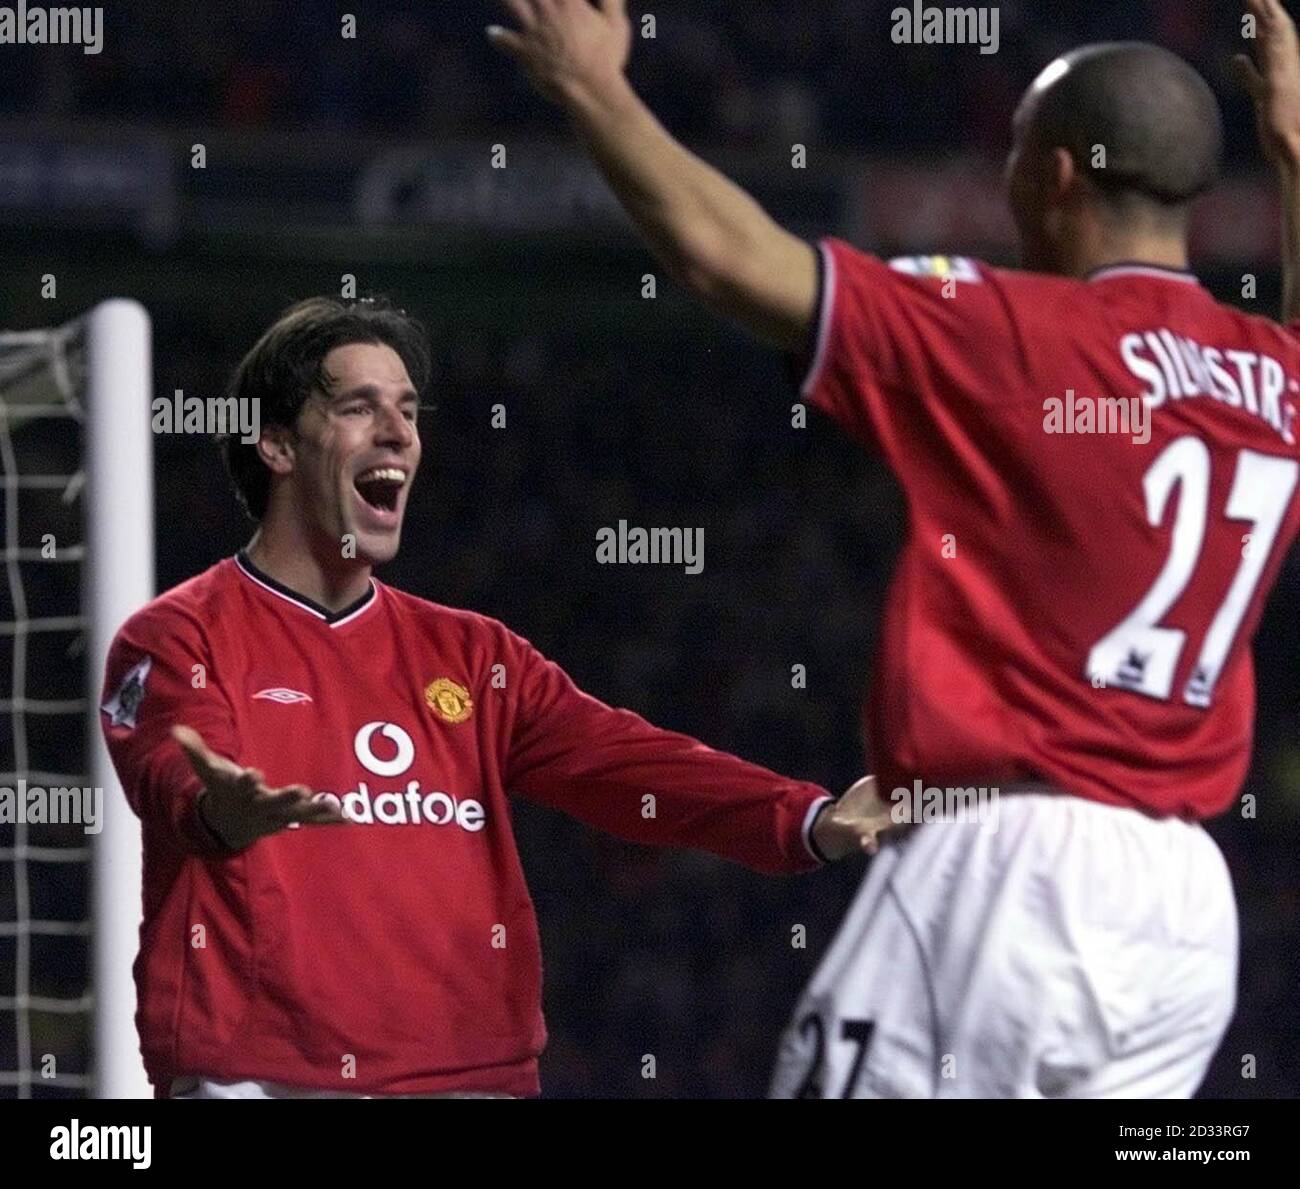 PLEASE READ FULL ADVISORY AT END OF CAPTION. Manchester United's Ruud Van Nistelrooy celebrates his goal with teammate Mikael Silvestre during their FA Barclaycard Premiership match against Newcastle United at Old Trafford.  THIS PICTURE CAN ONLY BE USED WITHIN THE CONTEXT OF AN EDITORIAL FEATURE. NO WEBSITE/INTERNET USE OF PREMIERSHIP MATERIAL UNLESS SITE IS REGISTERED WITH FOOTBALL ASSOCIATION PREMIER LEAGUE. Stock Photo